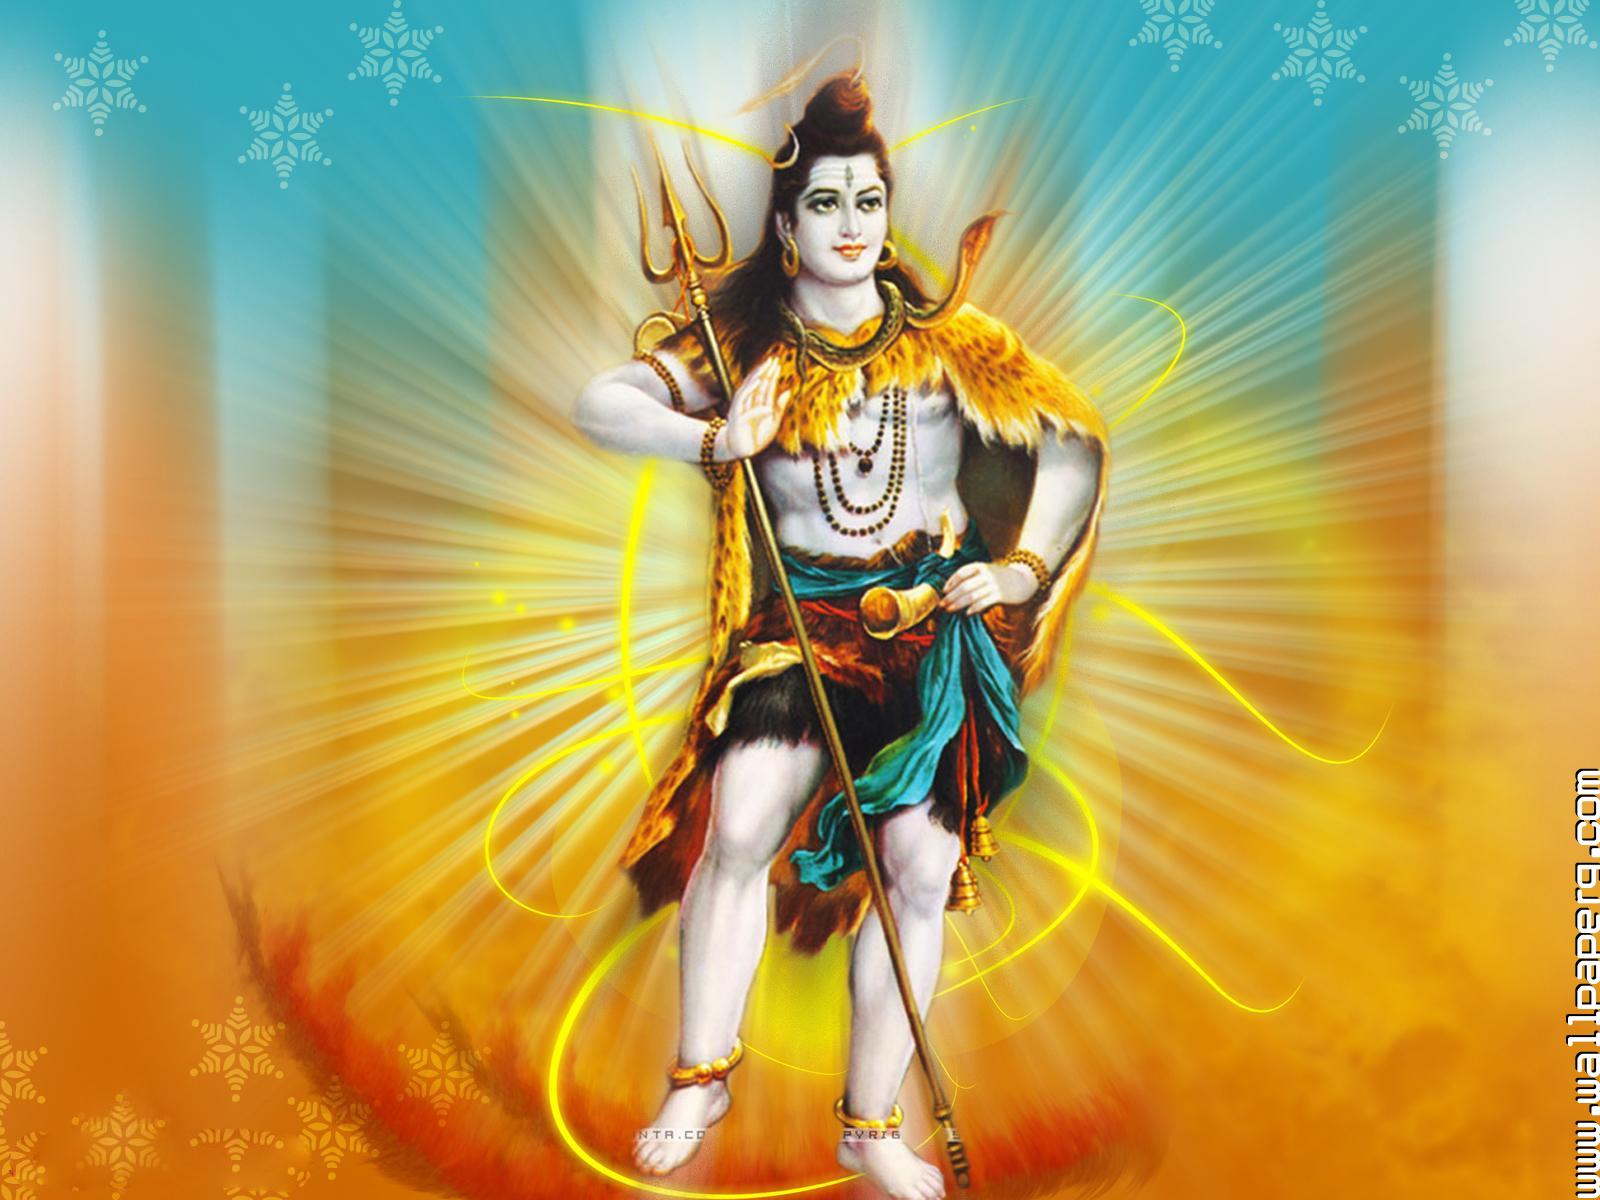 Download Bholenath wallpaper - Spiritual wallpaper for your mobile cell  phone